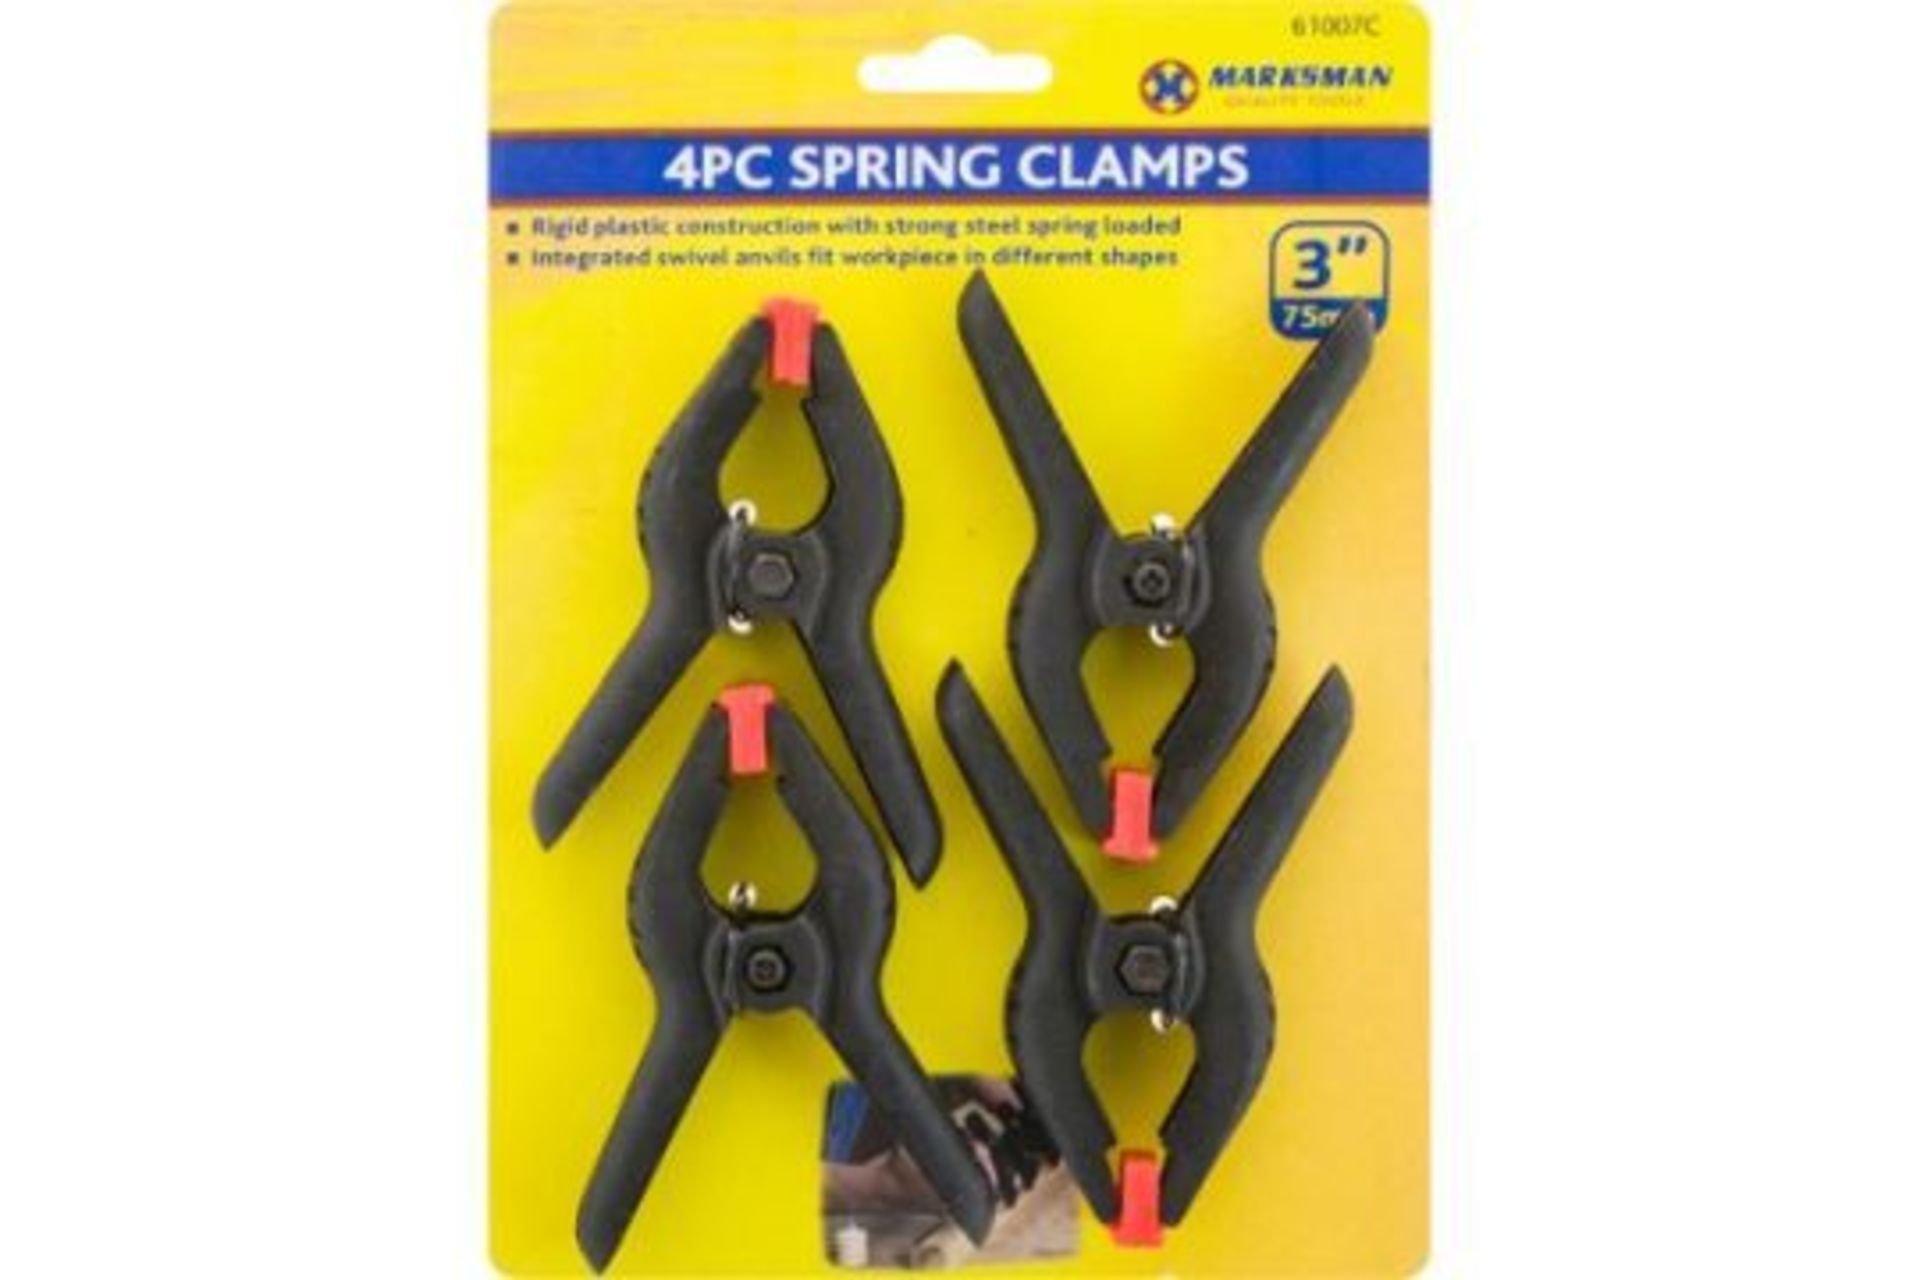 x2 3" Marksman 4PC Spring Clamps (8 In Total)